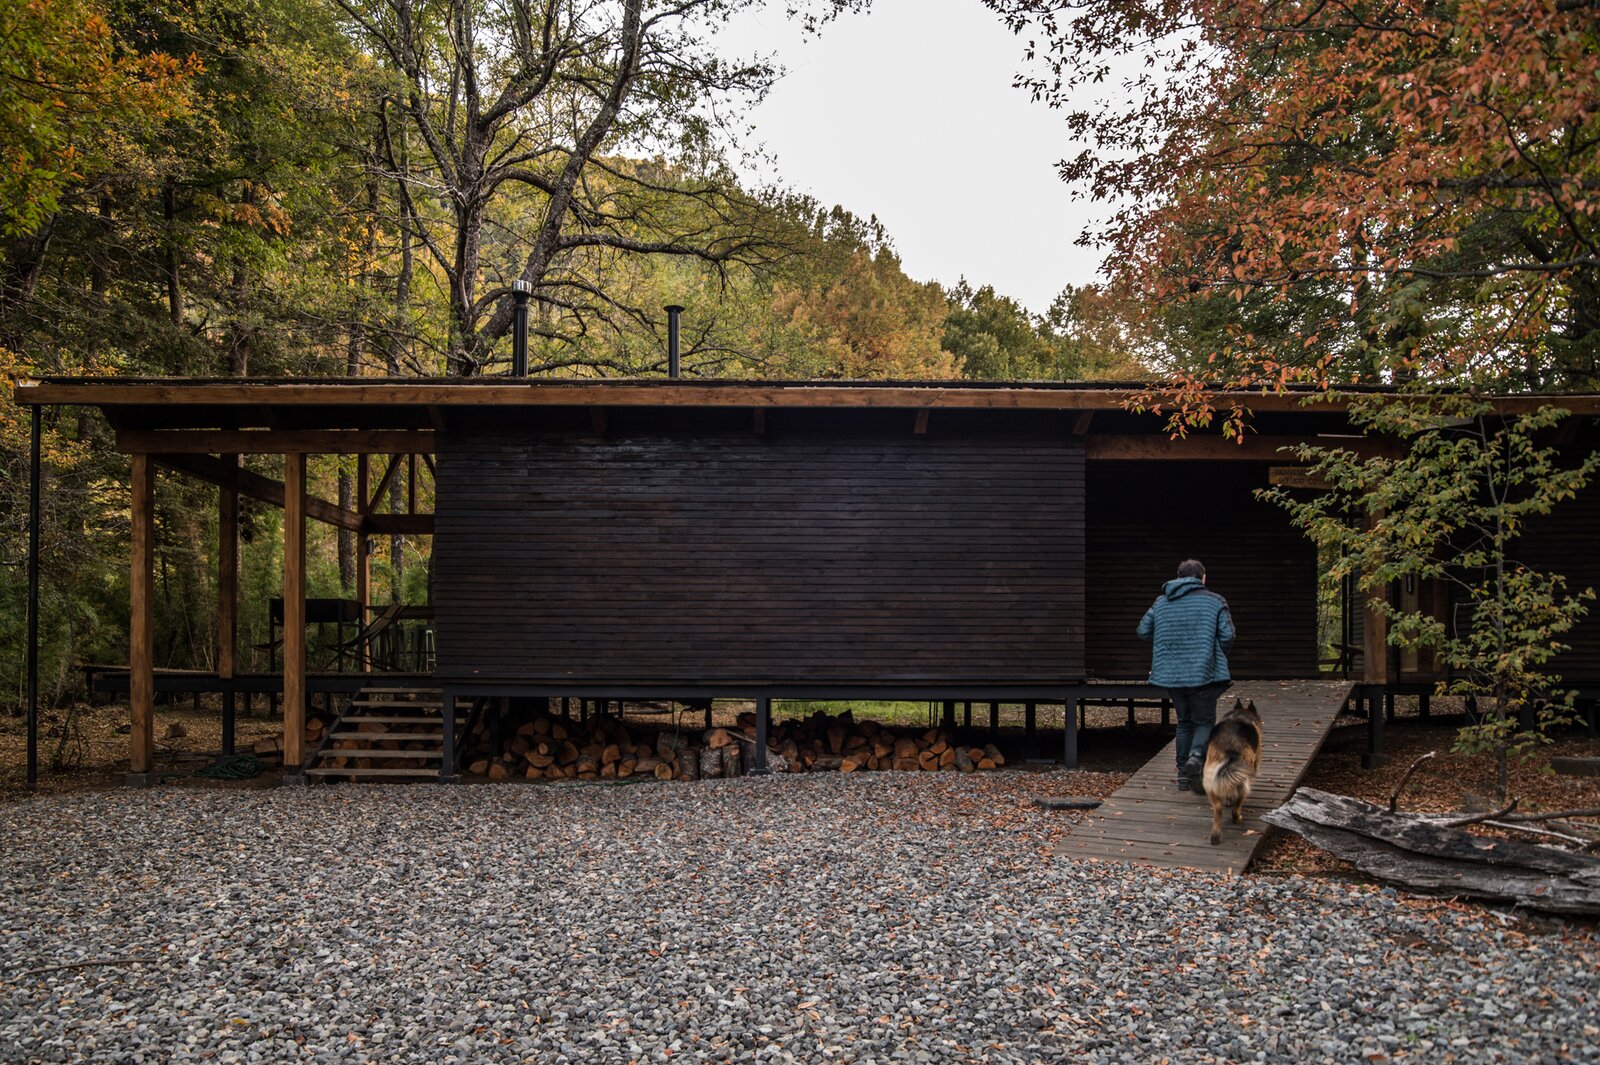 A Remote Chilean Cabin Appears to Float Above the Forest Floor